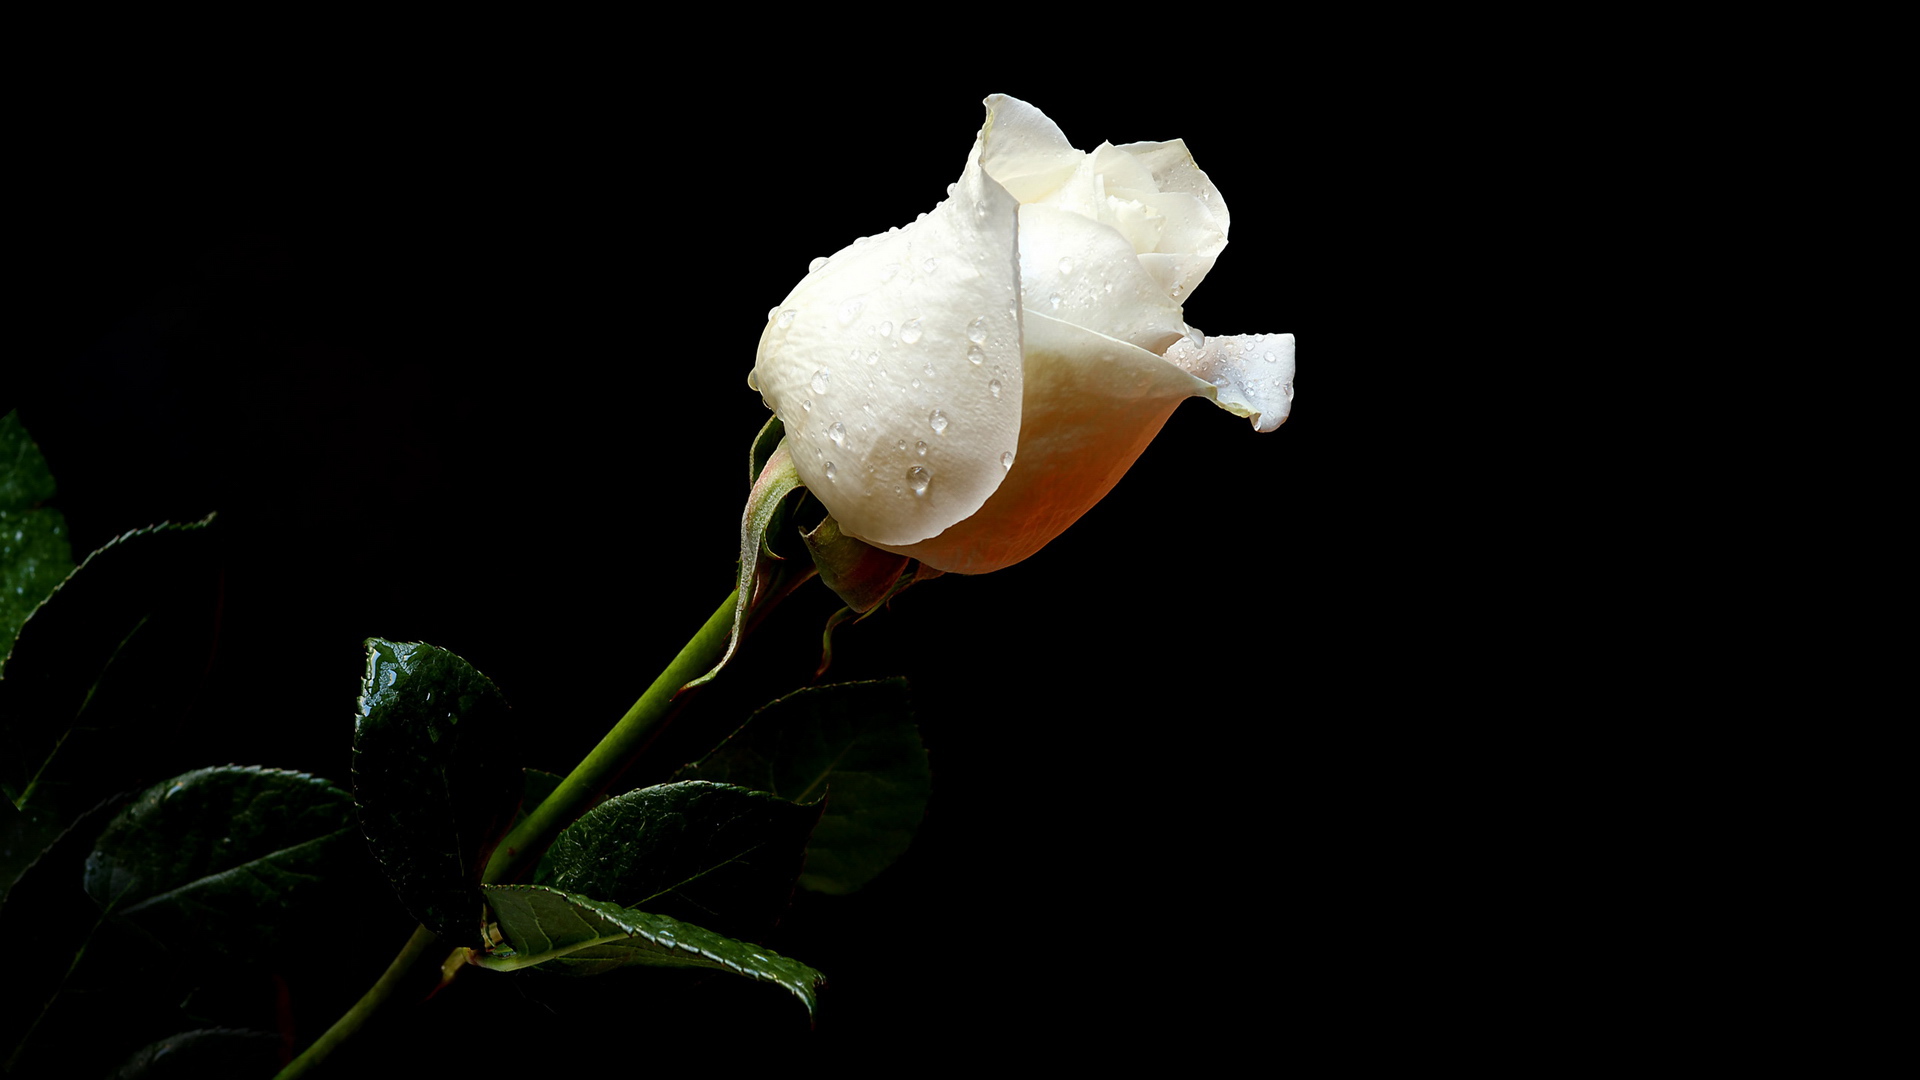 White Rose On A Black Background Wallpaper And Image